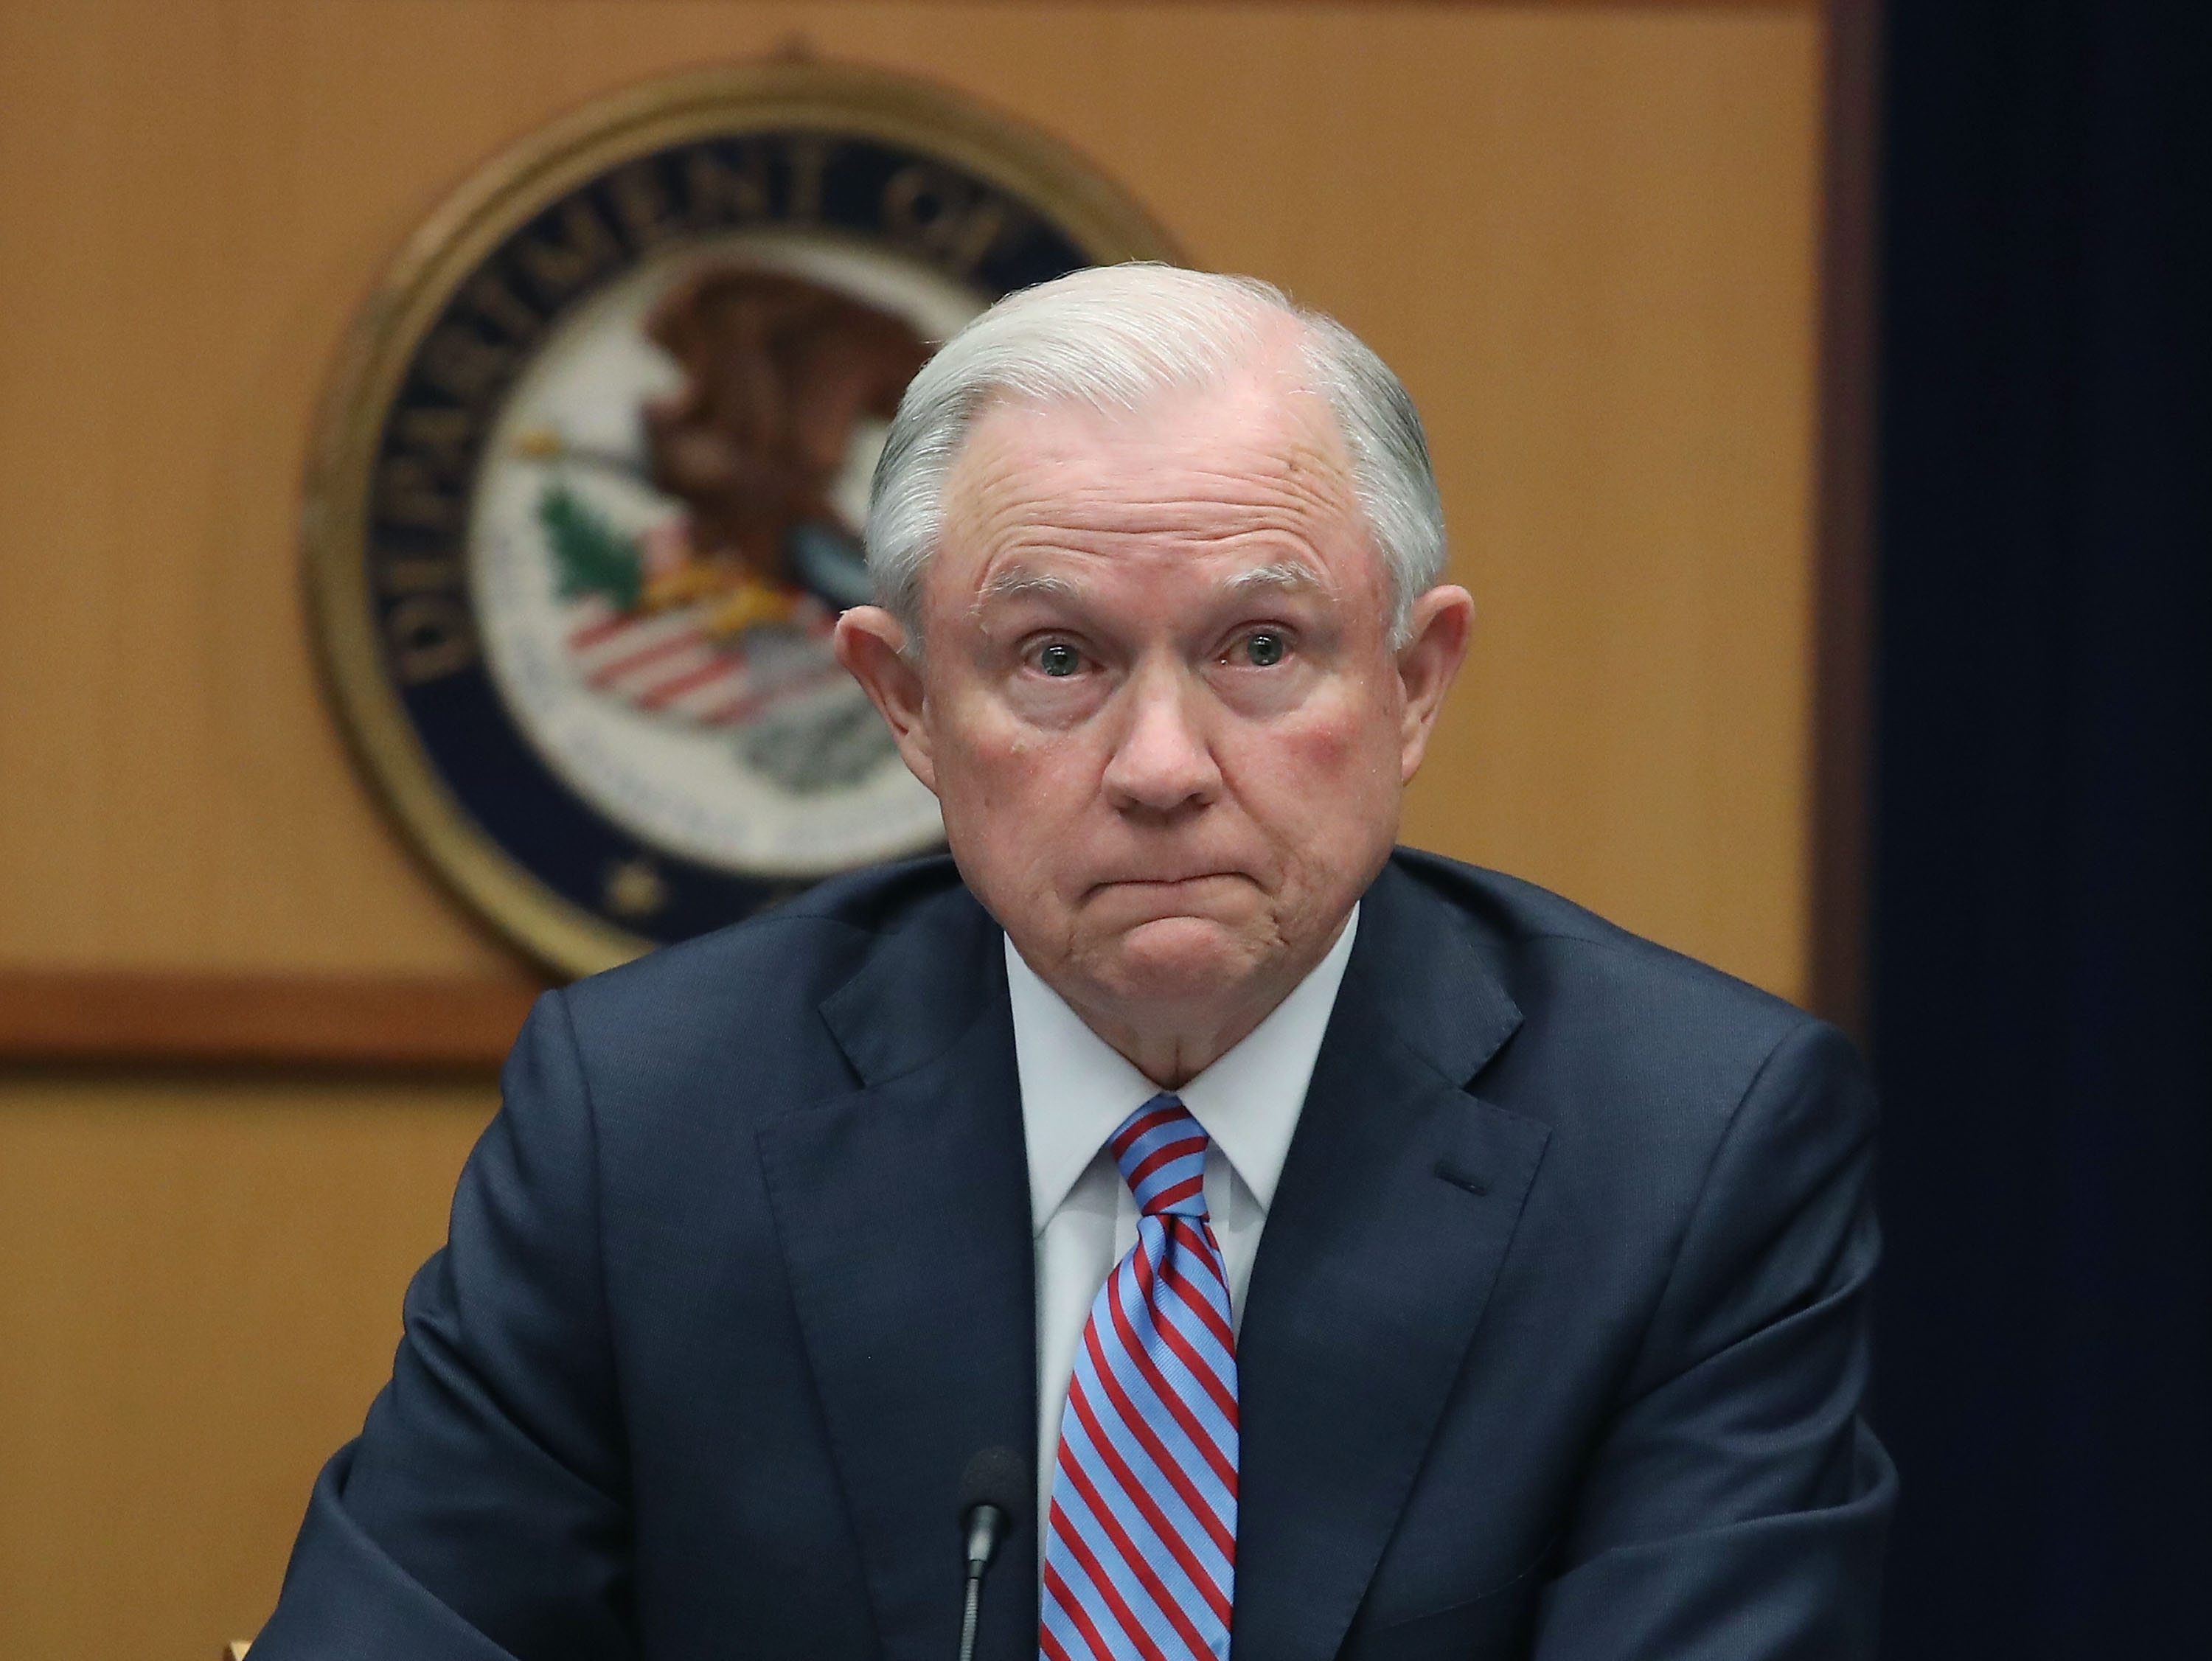 US Attorney General Jeff Sessions speaks about organized gang violence at the Department of Justice, April 18, 2016 in Washington, DC. Mark Wilson&mdash;Getty Images (Mark Wilson&mdash;Getty Images)